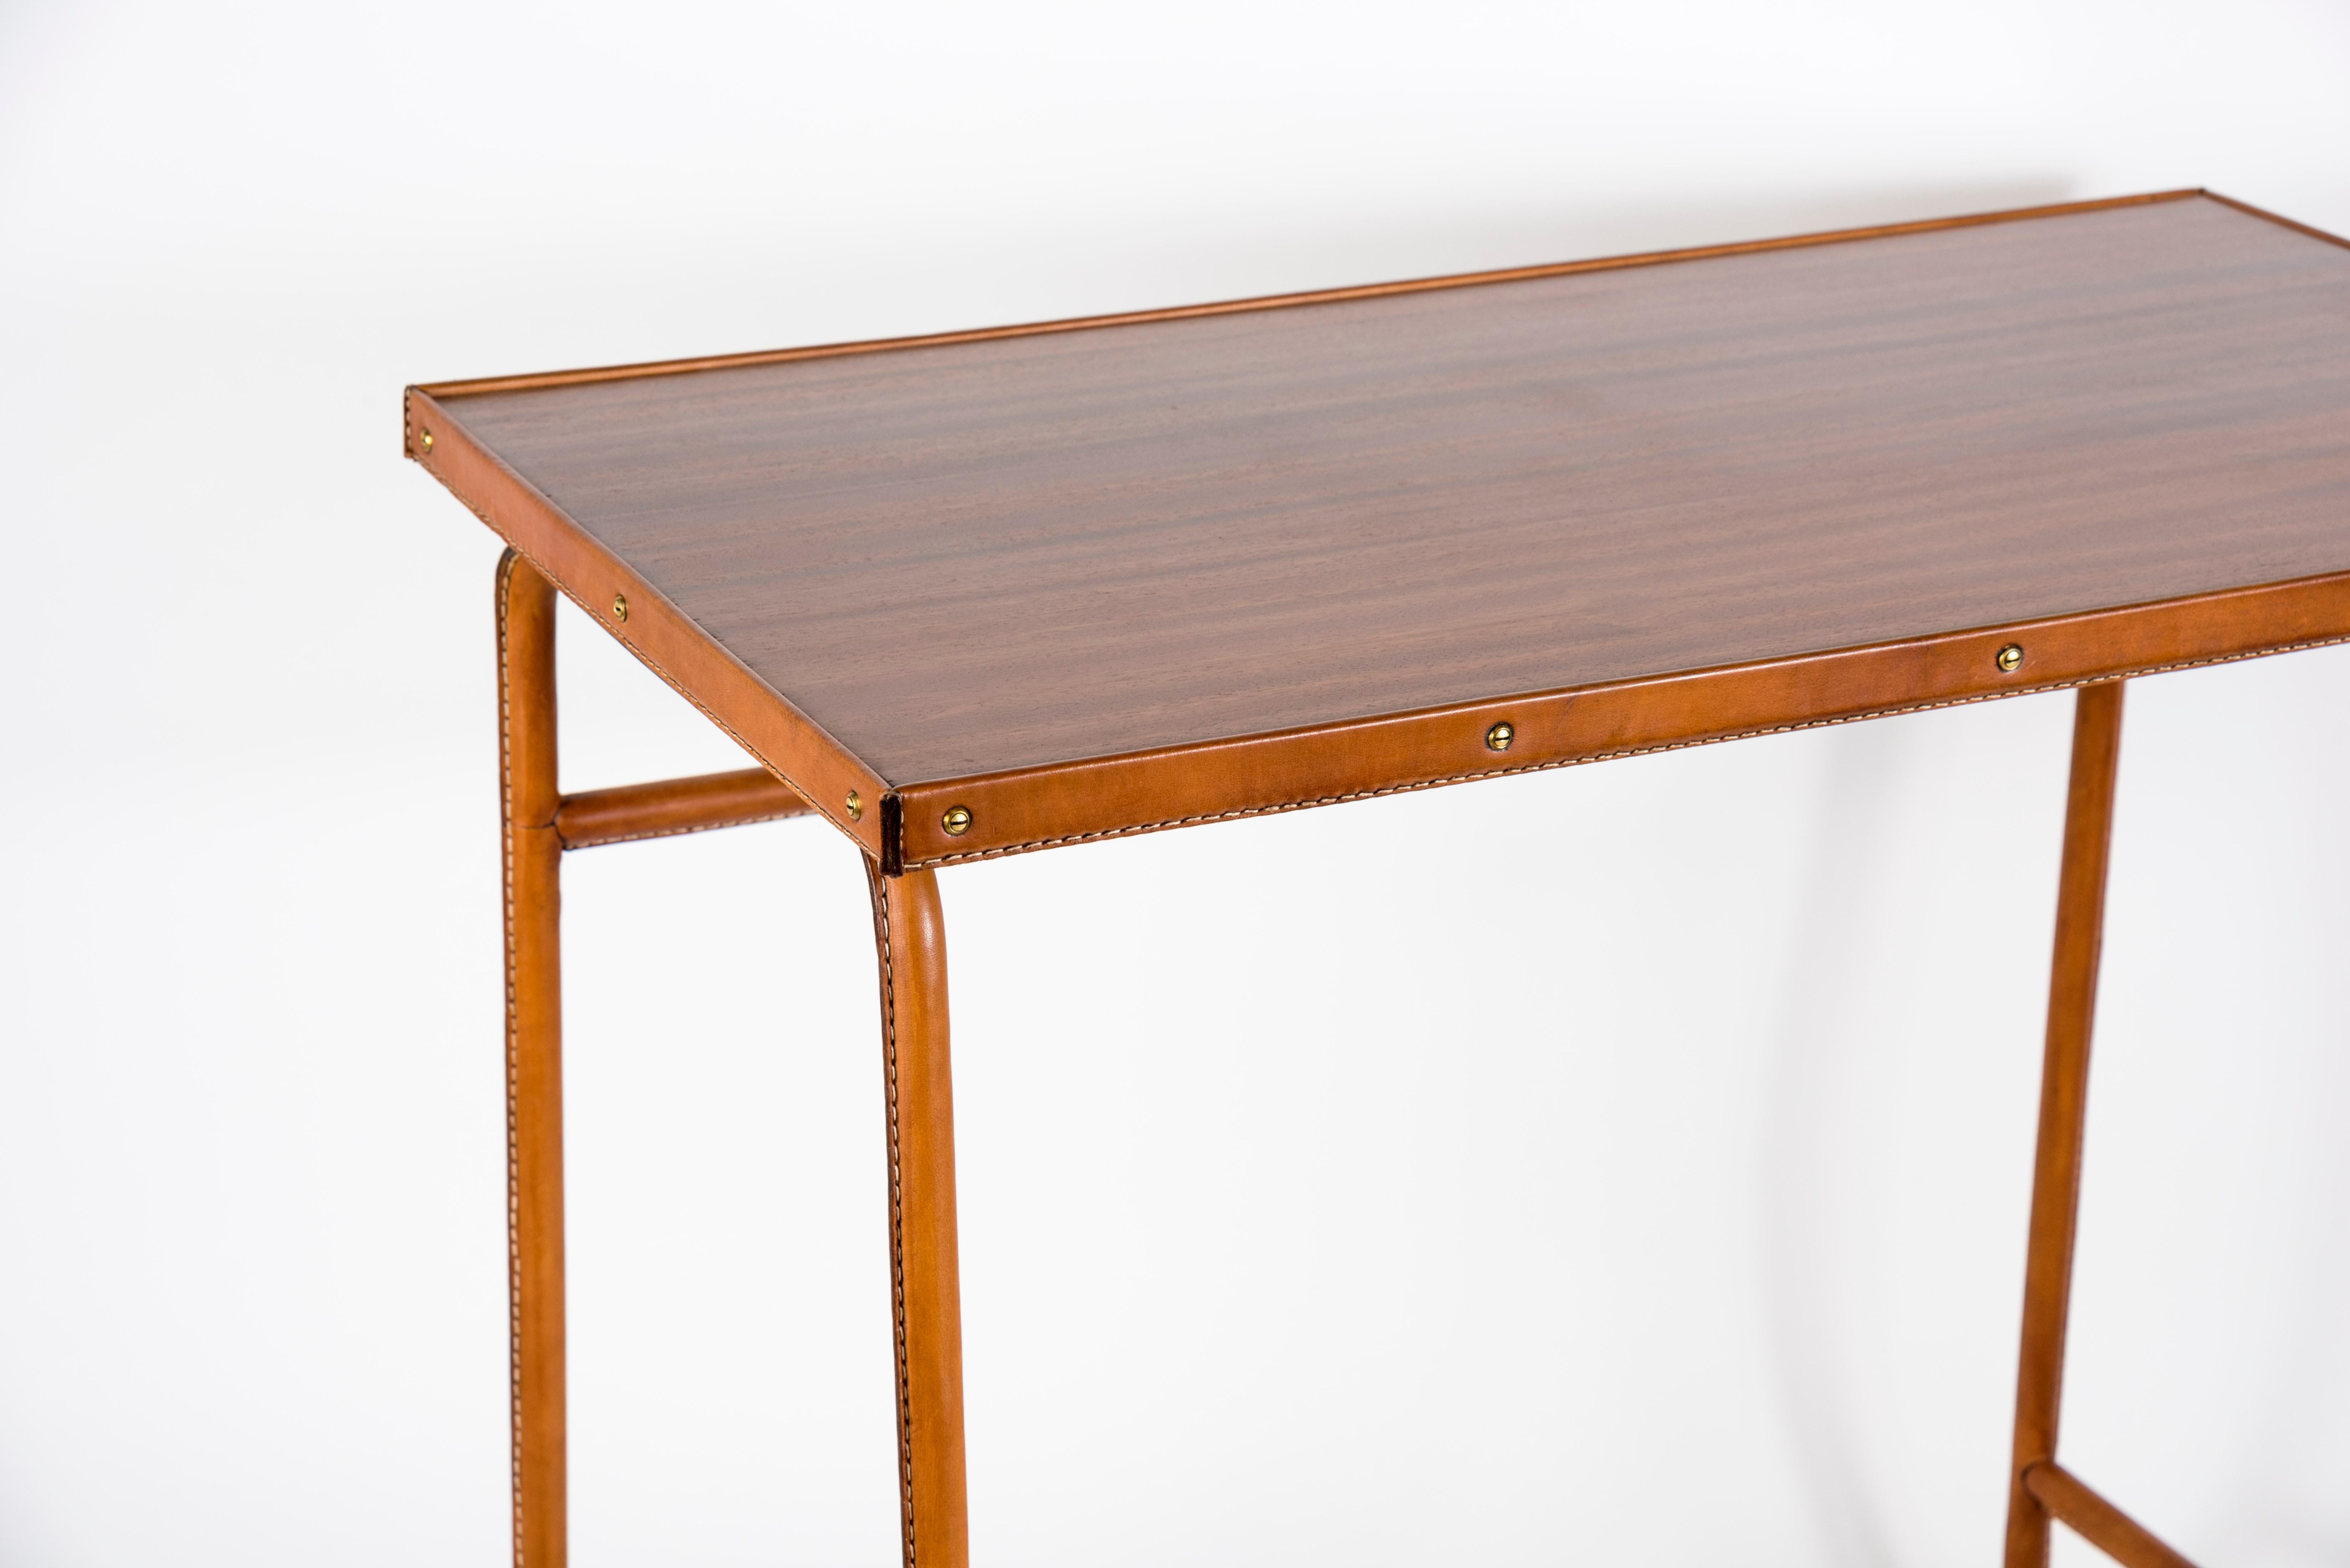 1950's stitched leather table by Jacques Adnet
France.